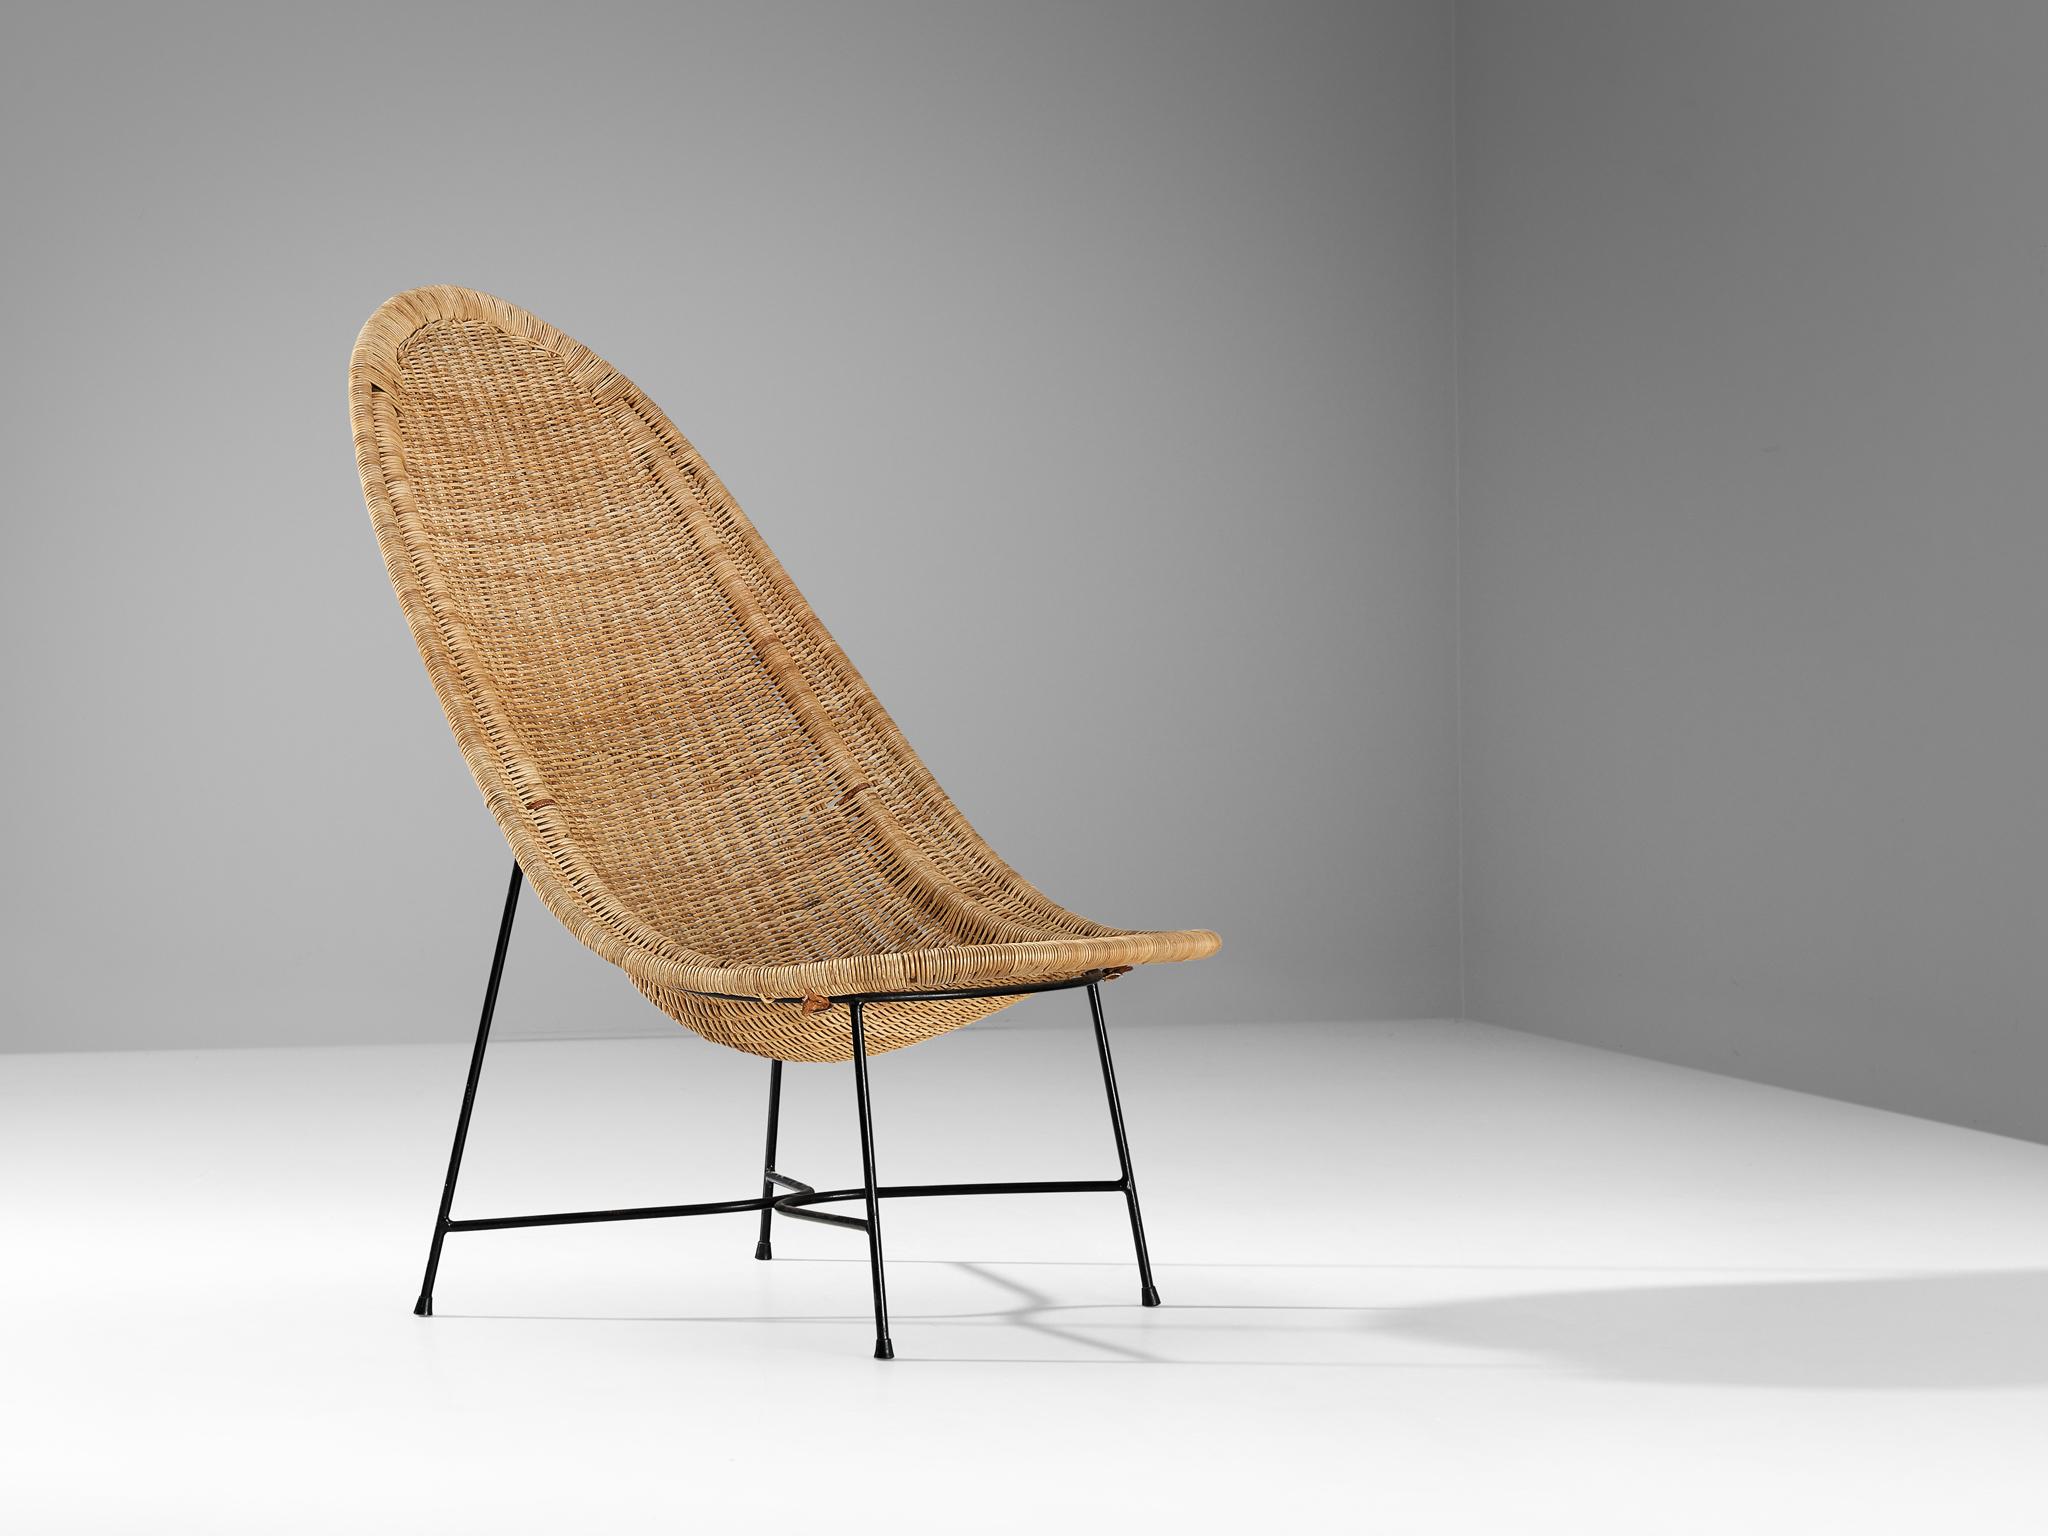 Kerstin Hörlin-Holmquist for Nordiska Kompaniet, 'Stora Kraal' lounge chair, cane, coated steel, leather, steel, rubber, Sweden, design 1952, produced 1950s

The 'Stora Kraal' easy chair was designed by Kerstin Hörlin-Holmquist in 1952 and made